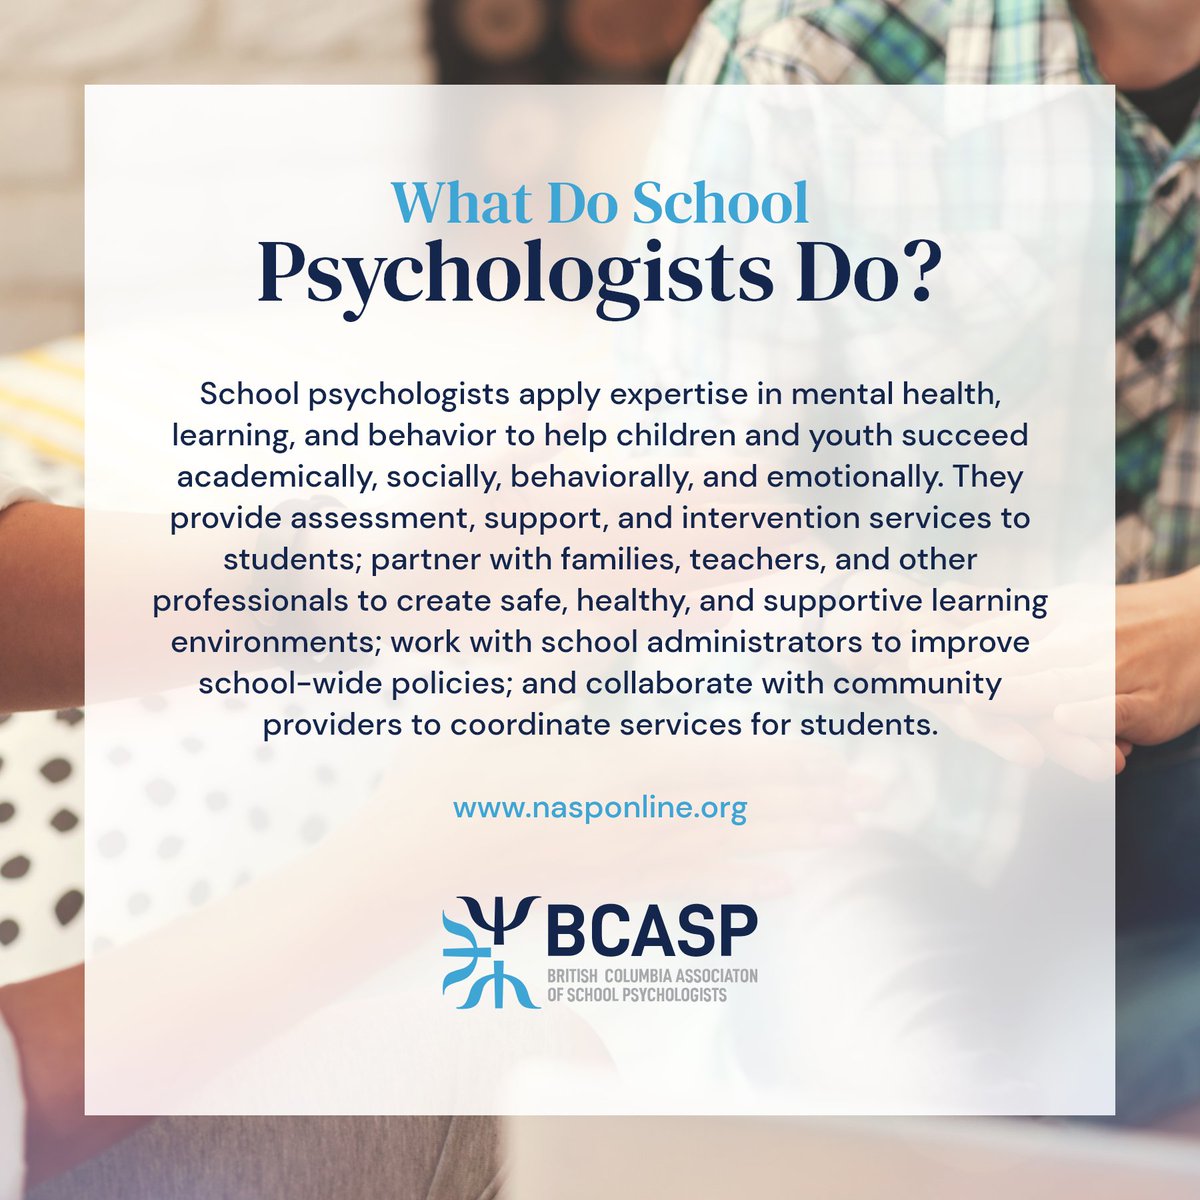 Being a #SchoolPsychologist can be a professionally and emotionally rewarding career path for people passionate about helping children and youth. 🤍

This role allows you to use your skills to empower young people to achieve mental wellness and excel in school and life.